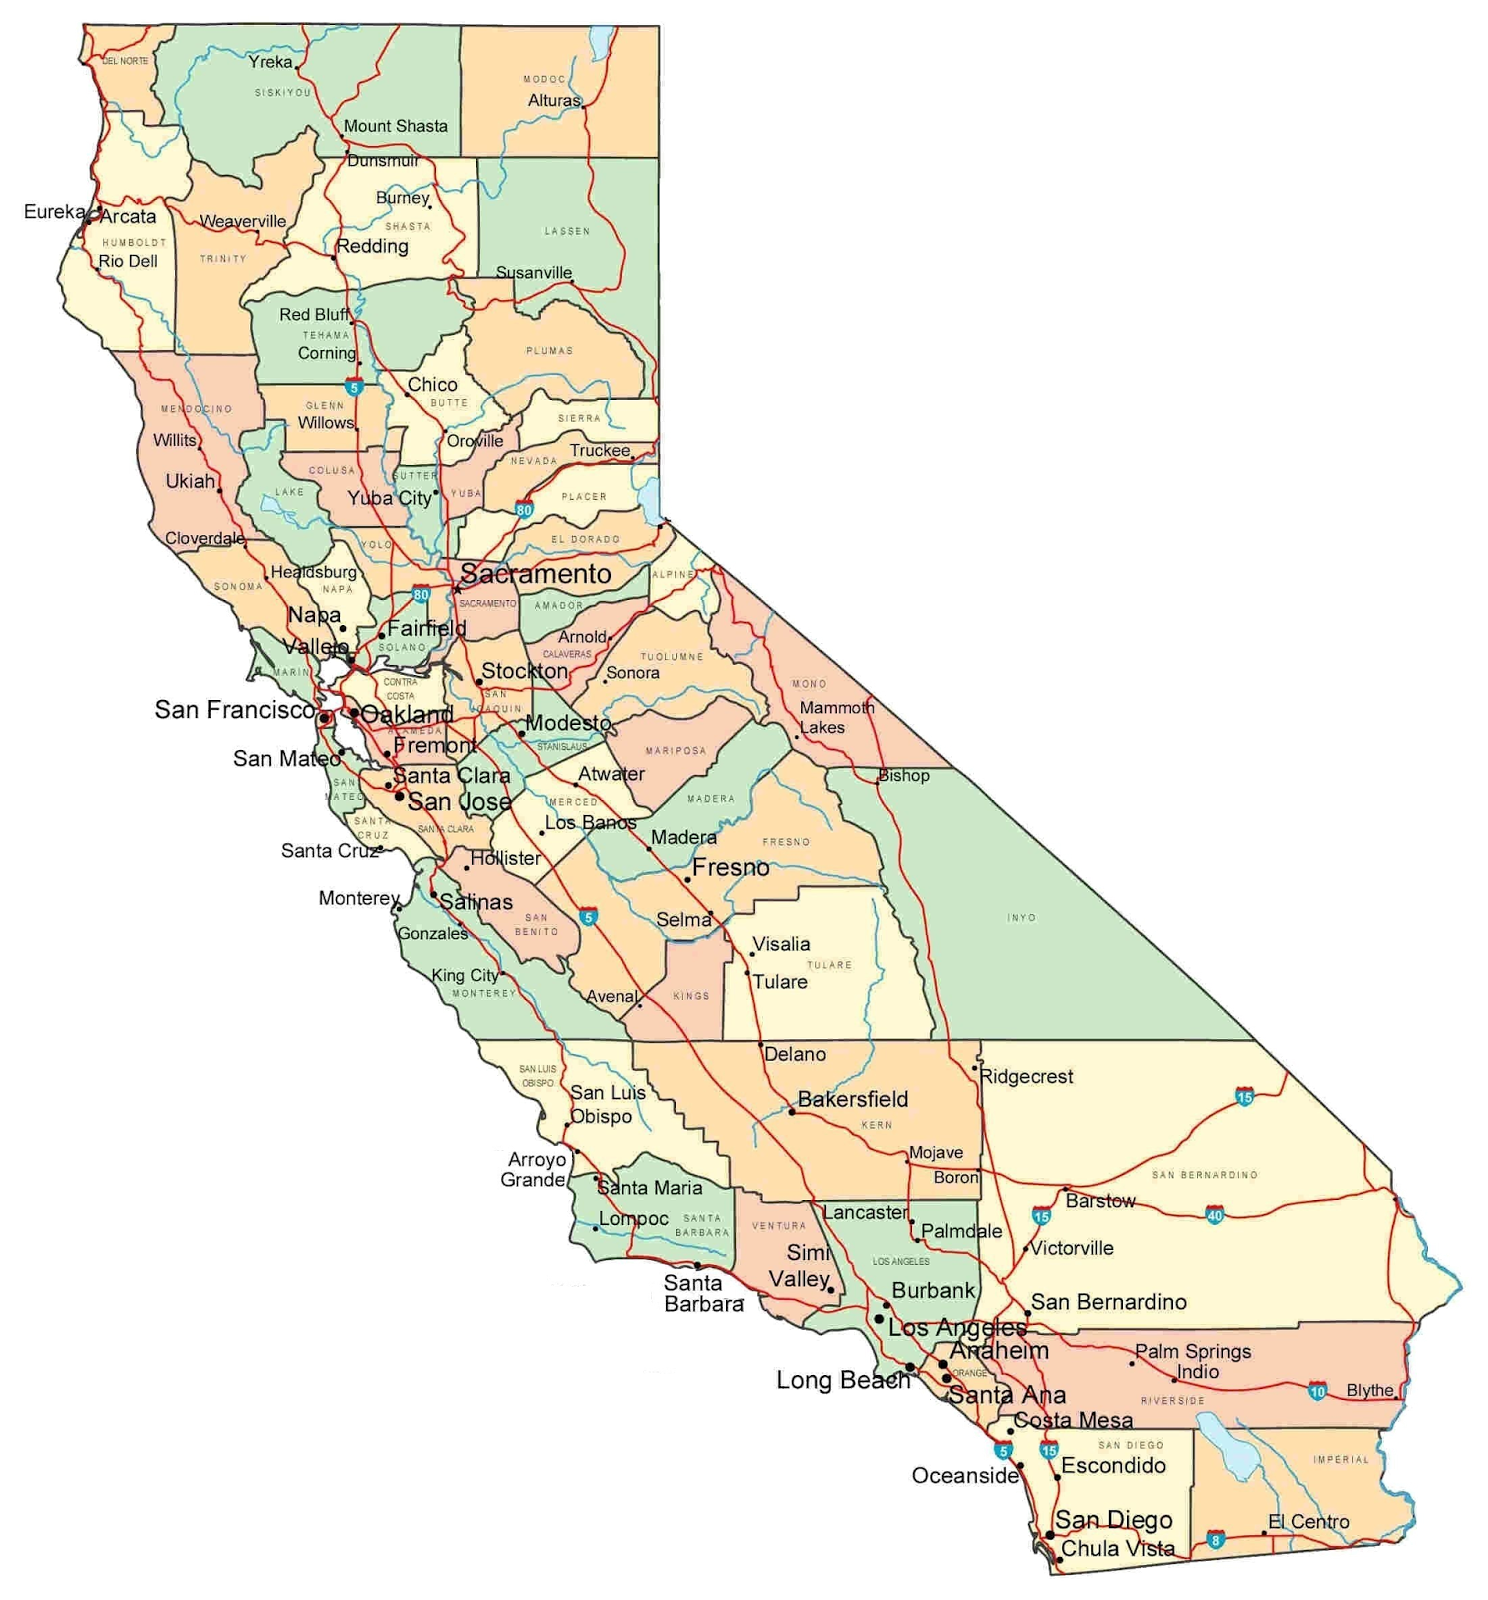 Tamerlanes Thoughts California Counties I Have Not Visited